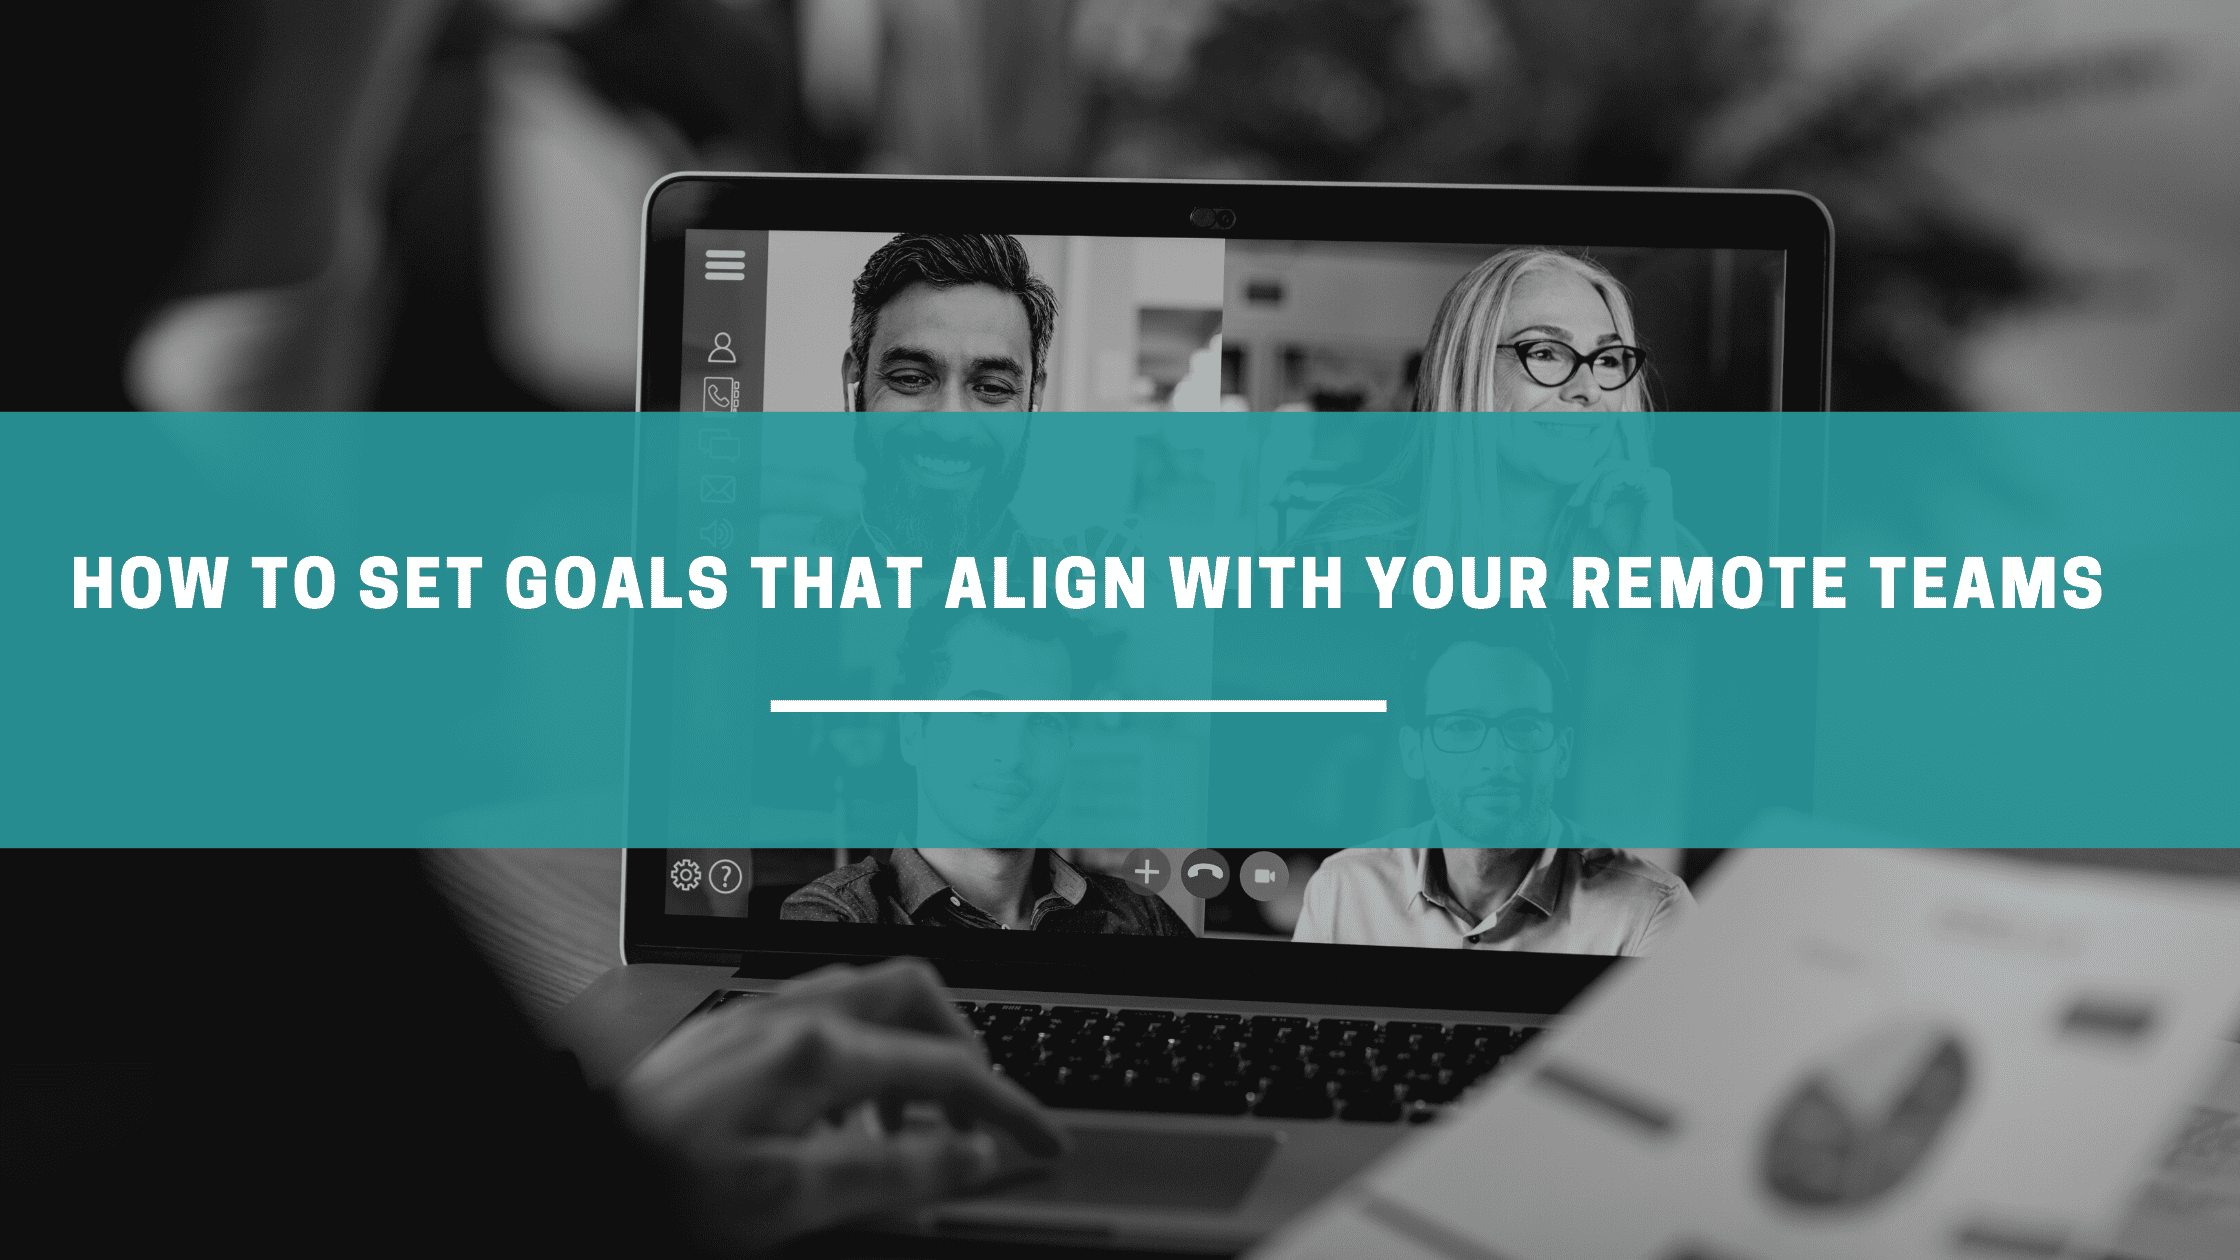 How to set goals for your remote teams. How to set goals that align to your remote team's goals. How to set goals for your remote teams.